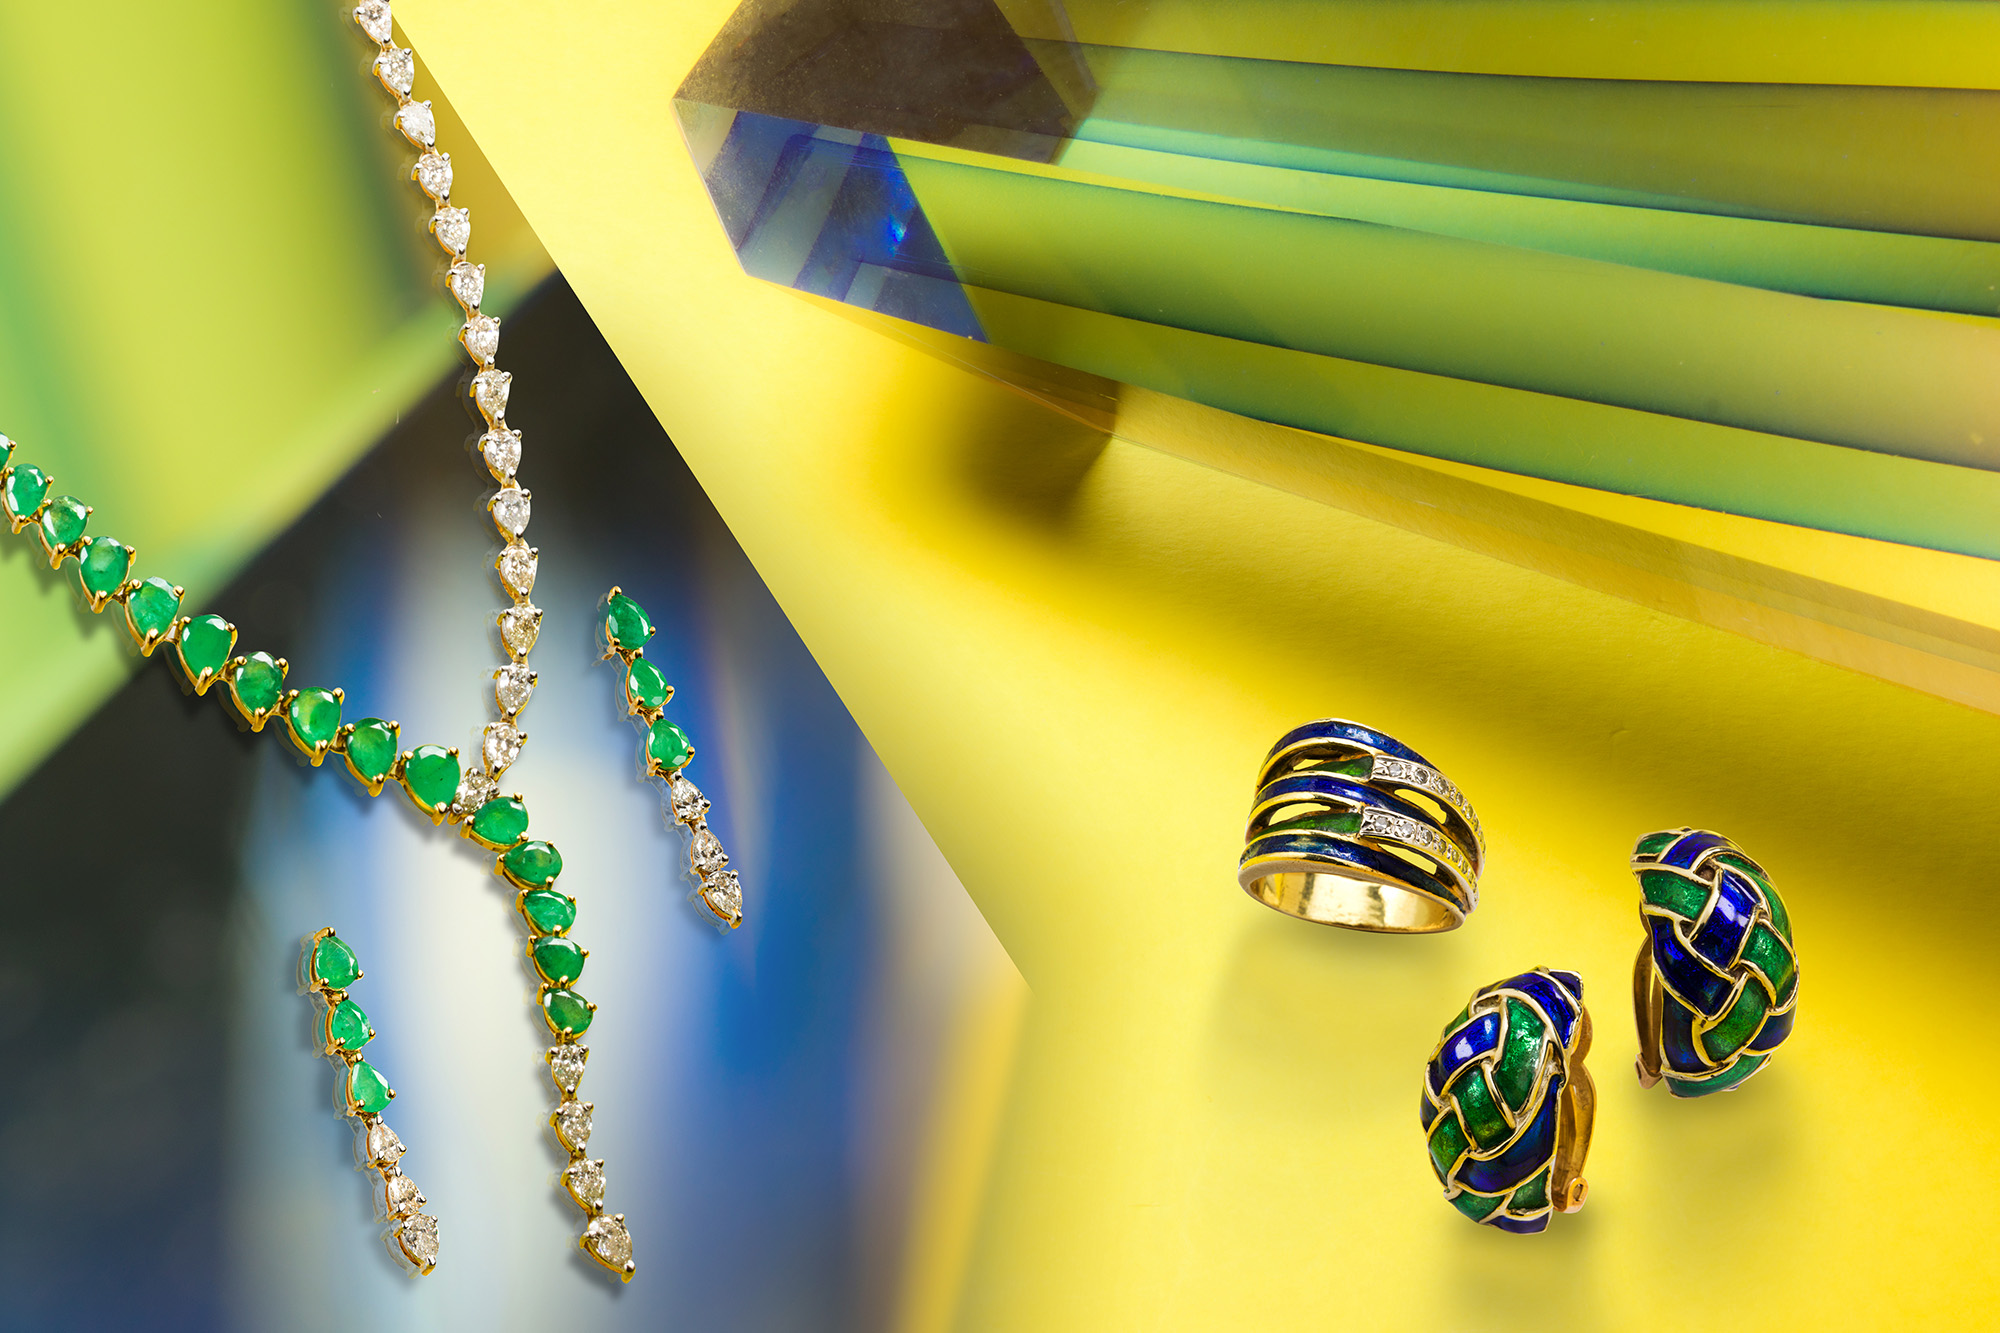 Left: An emerald, diamond and fourteen karat necklace and earrings suite. Right: A pair of enameled ear clips and ring suite.